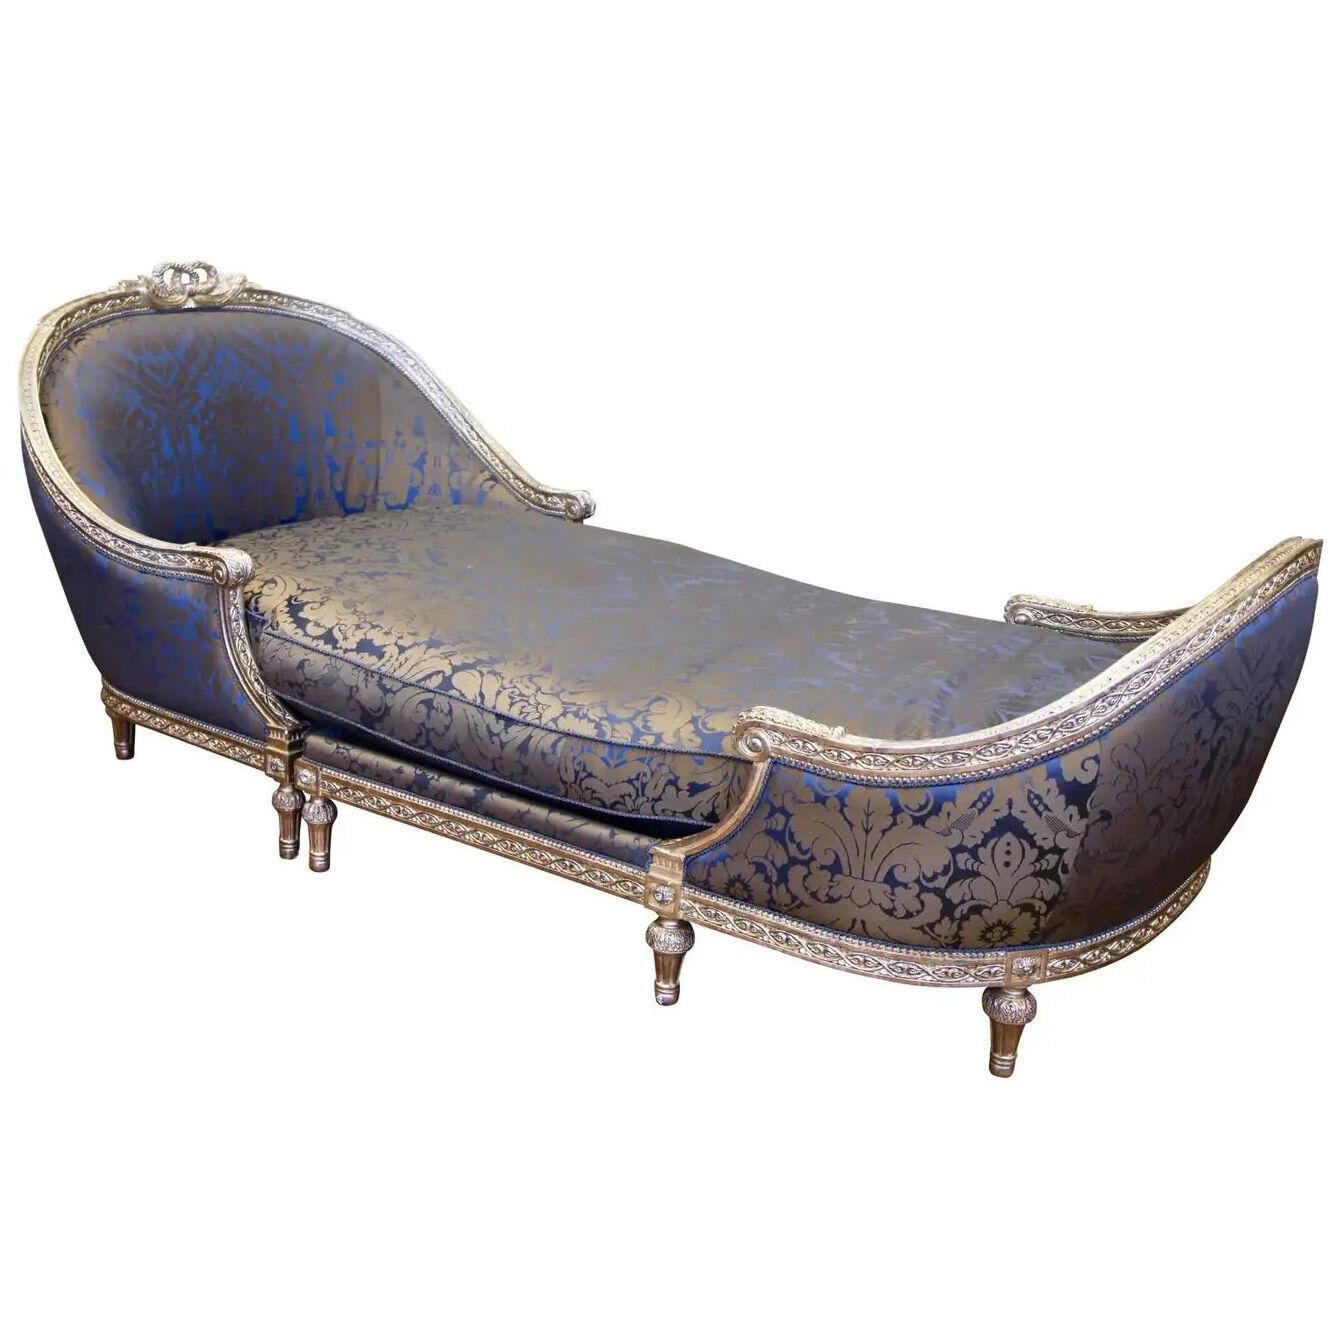 Louis XVI Style Chaise Longue Based on a Coco Chanel Chair